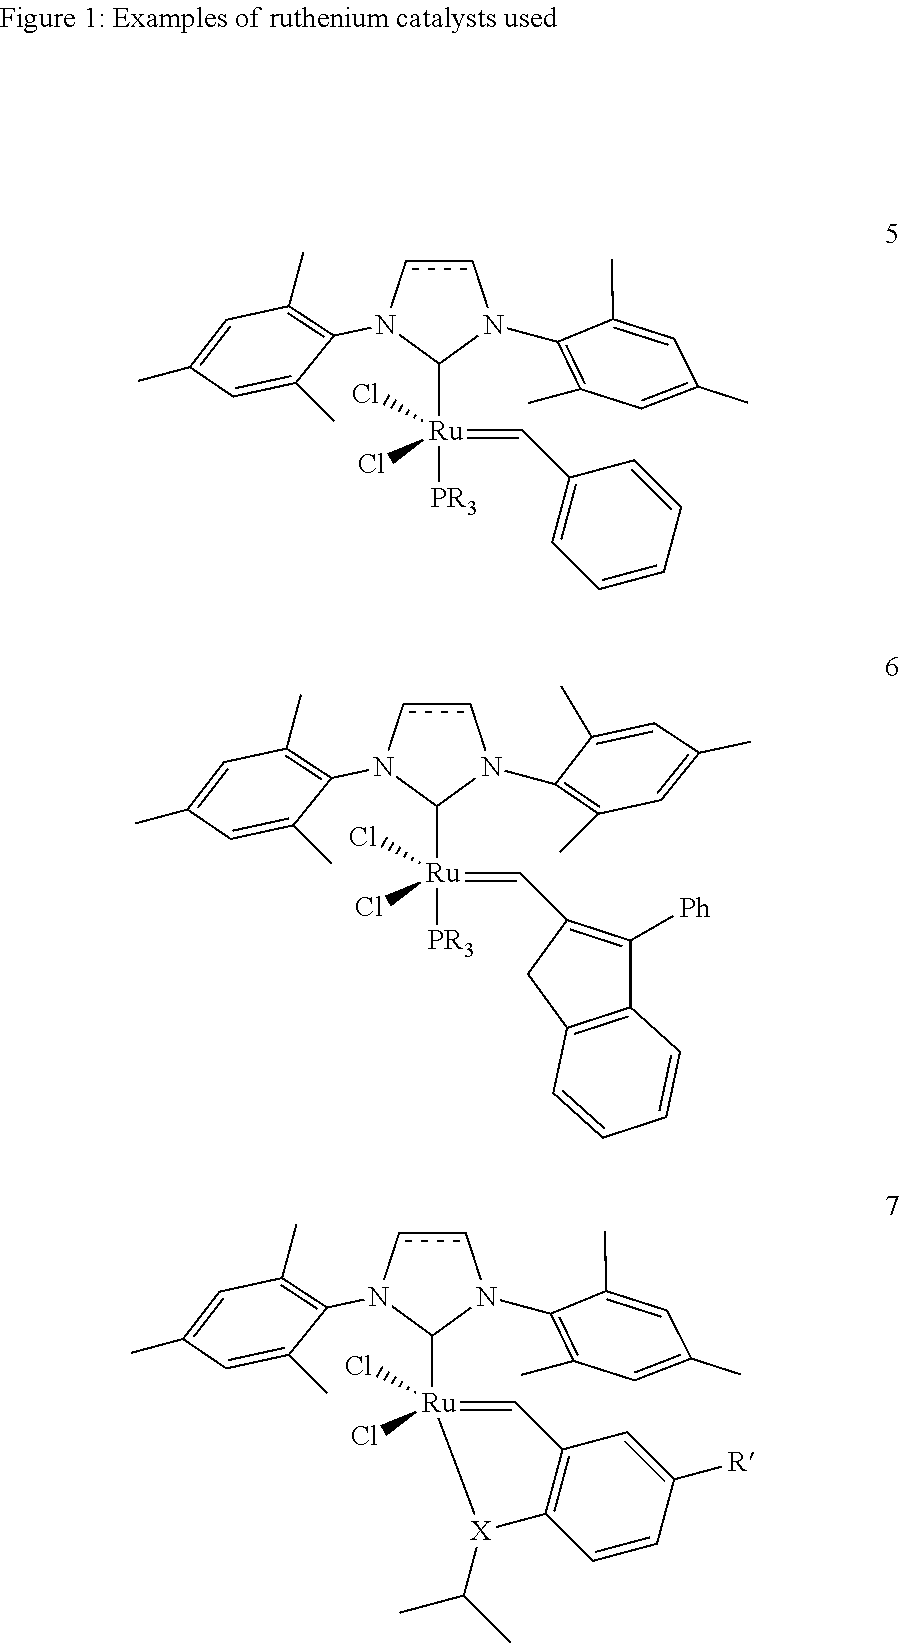 Unsaturated dicarboxylic acids from unsaturated cyclic hydrocarbons and acrylic acid by way of metathesis, the use thereof as monomers for polyamides, polyesters and polyurethanes, and subsequent reaction to diols and diamines